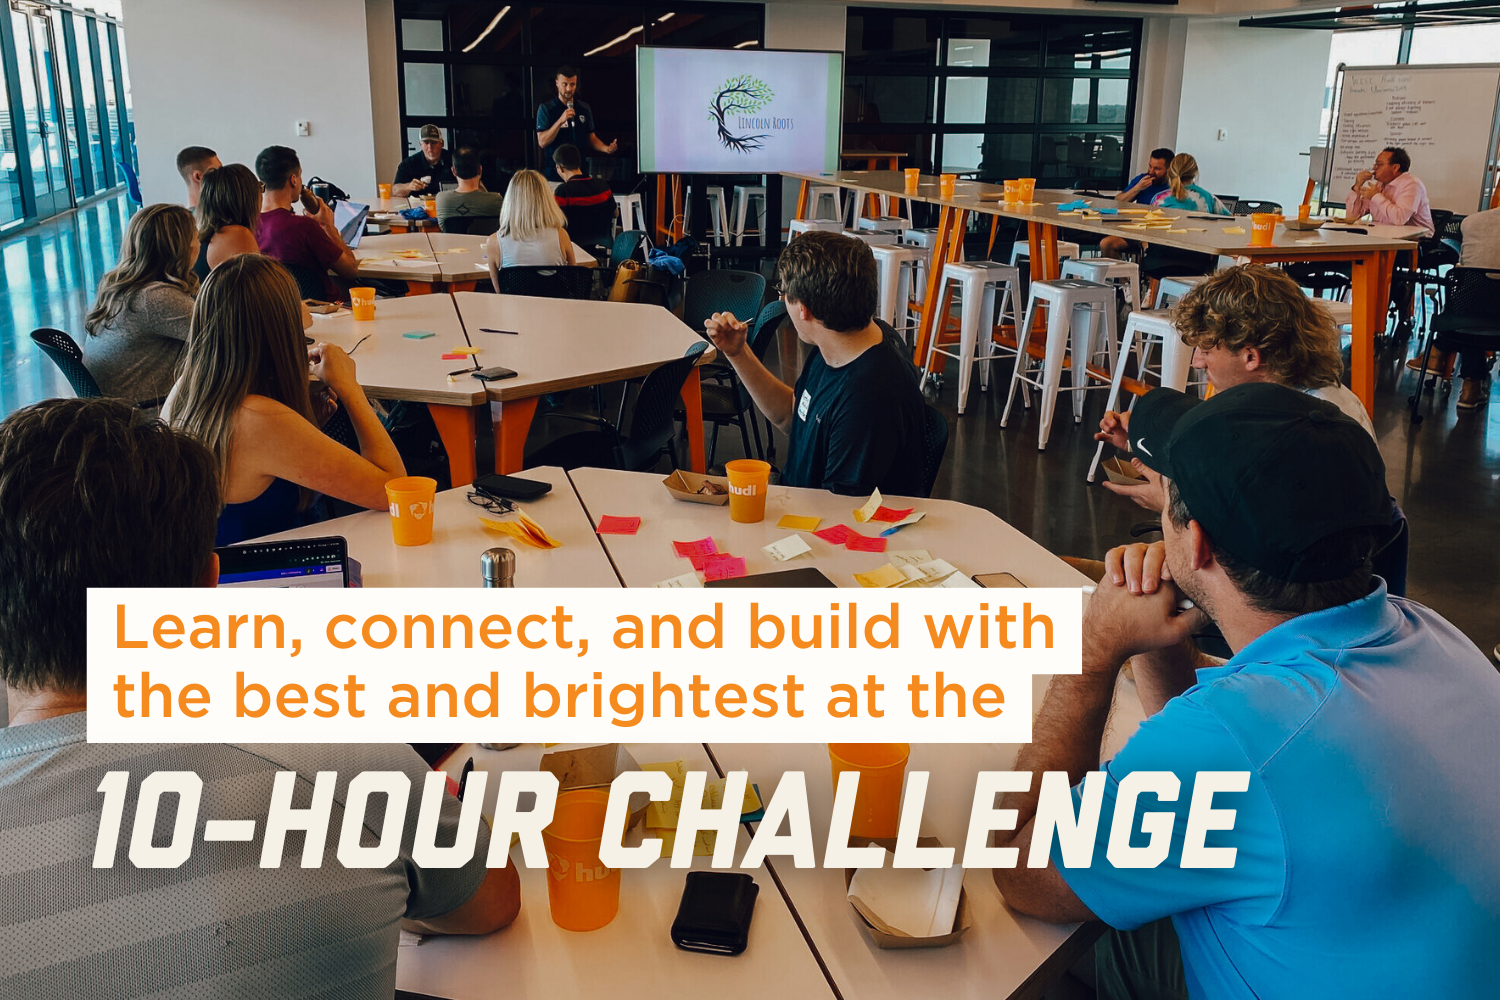 The 10-Hour Challenge, hosted by NMotion and Silicon Prairie News, aims to help attendees learn, connect, and build.